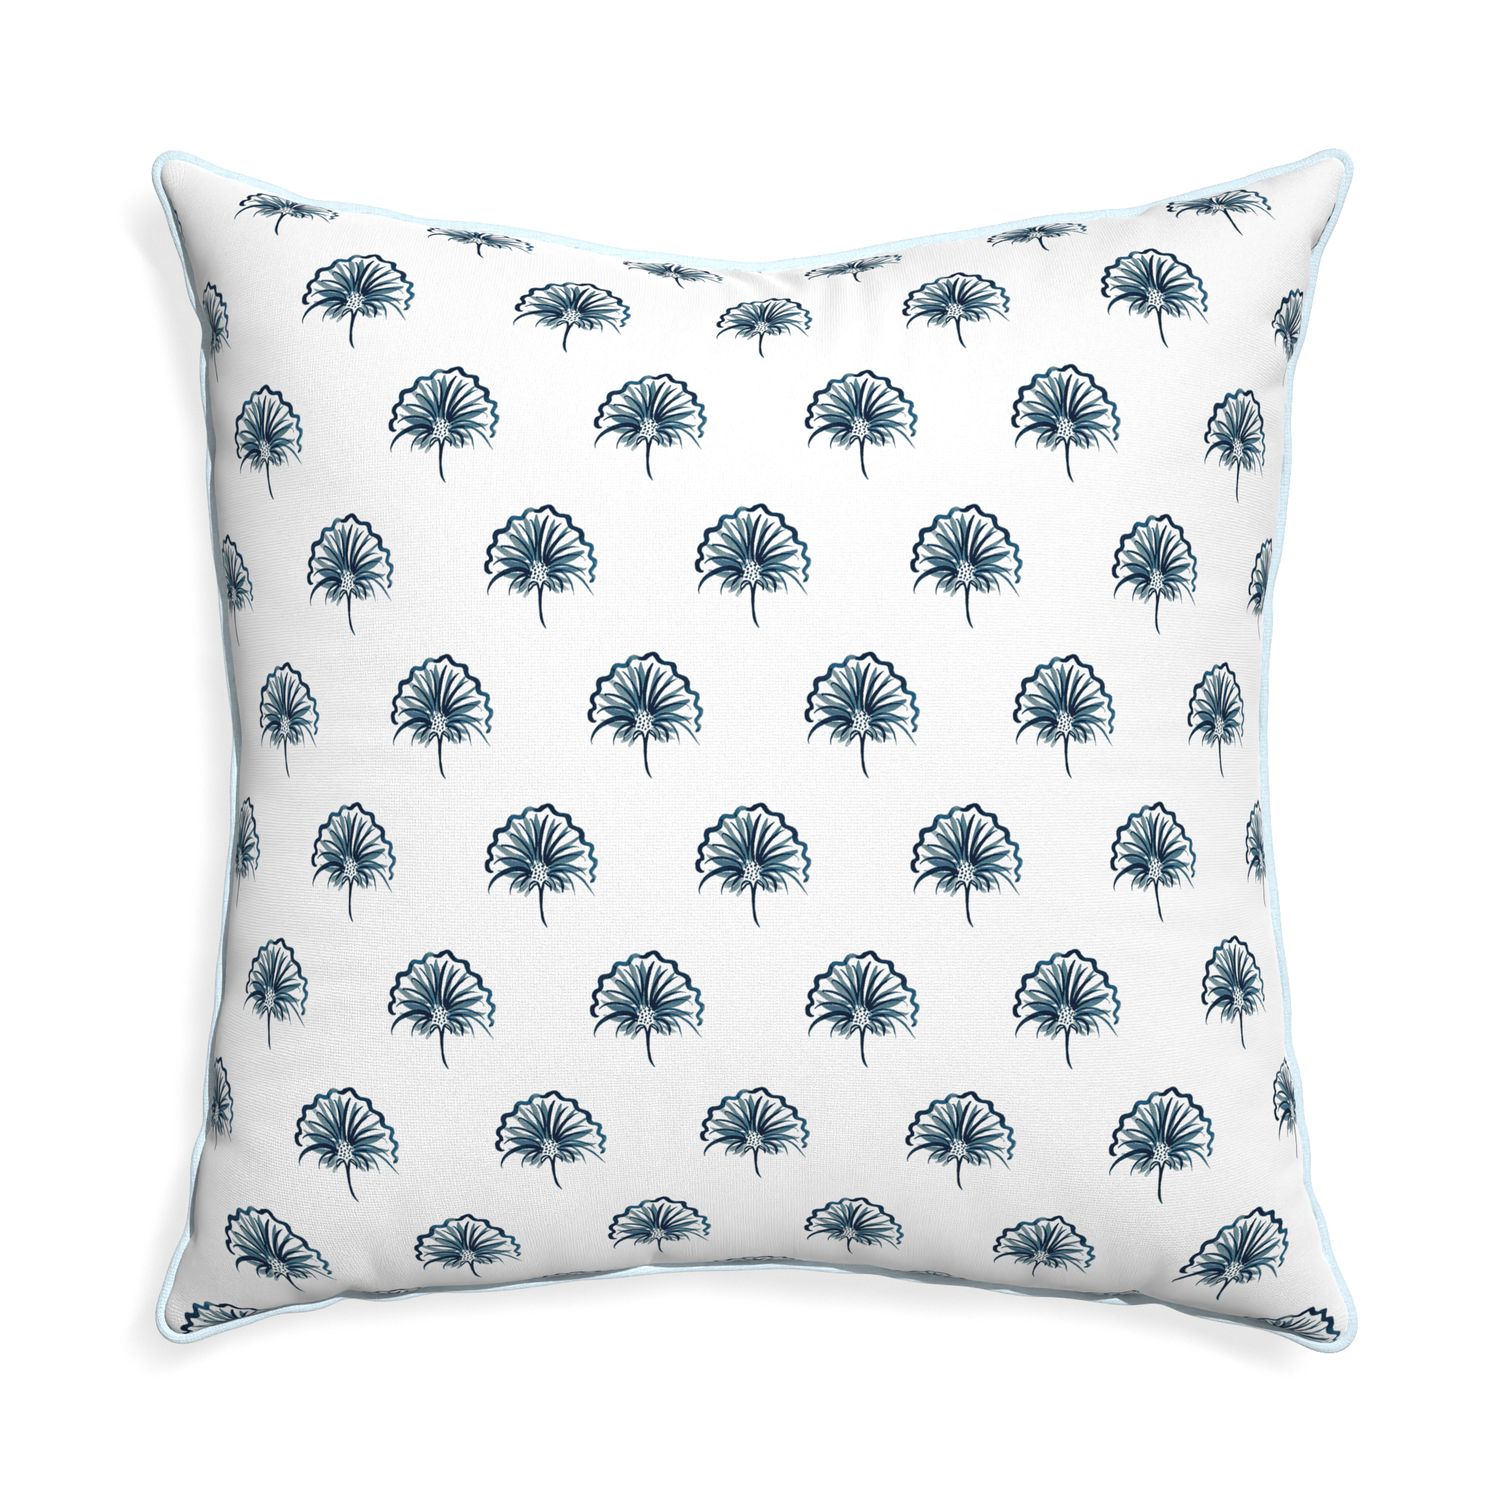 Euro-sham penelope midnight custom pillow with powder piping on white background